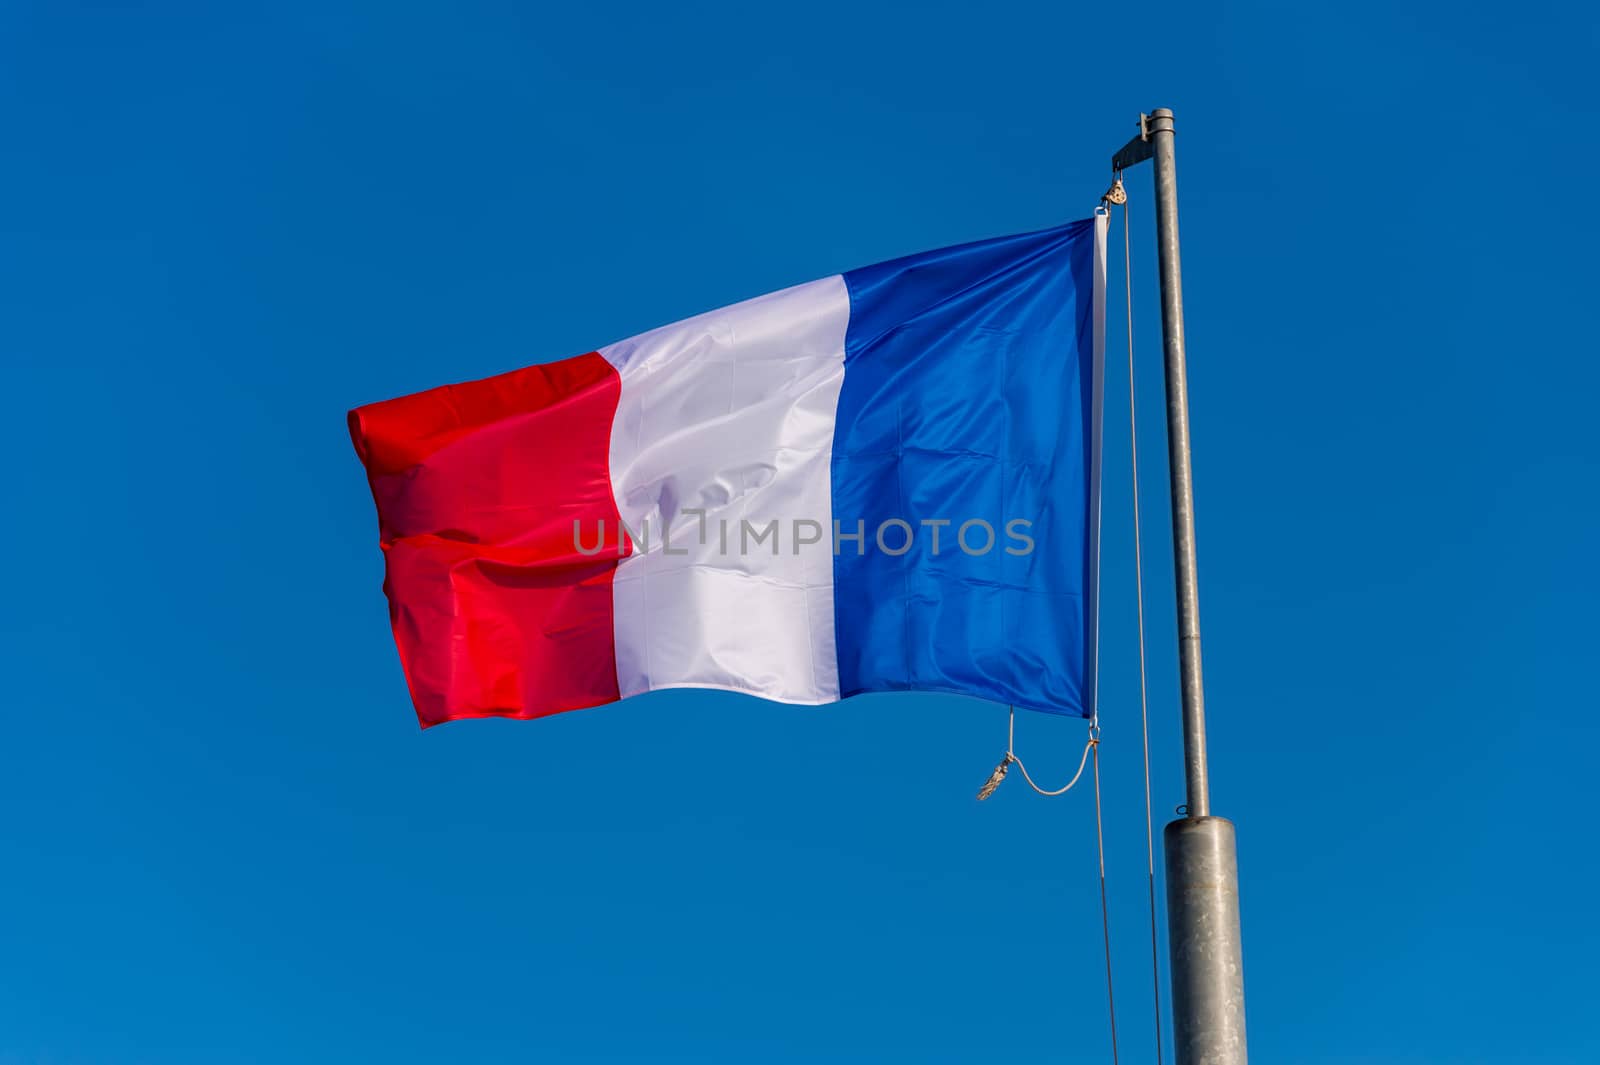 French flag waving against blue sky in Boulogne sur Mer, France. by mbruxelle